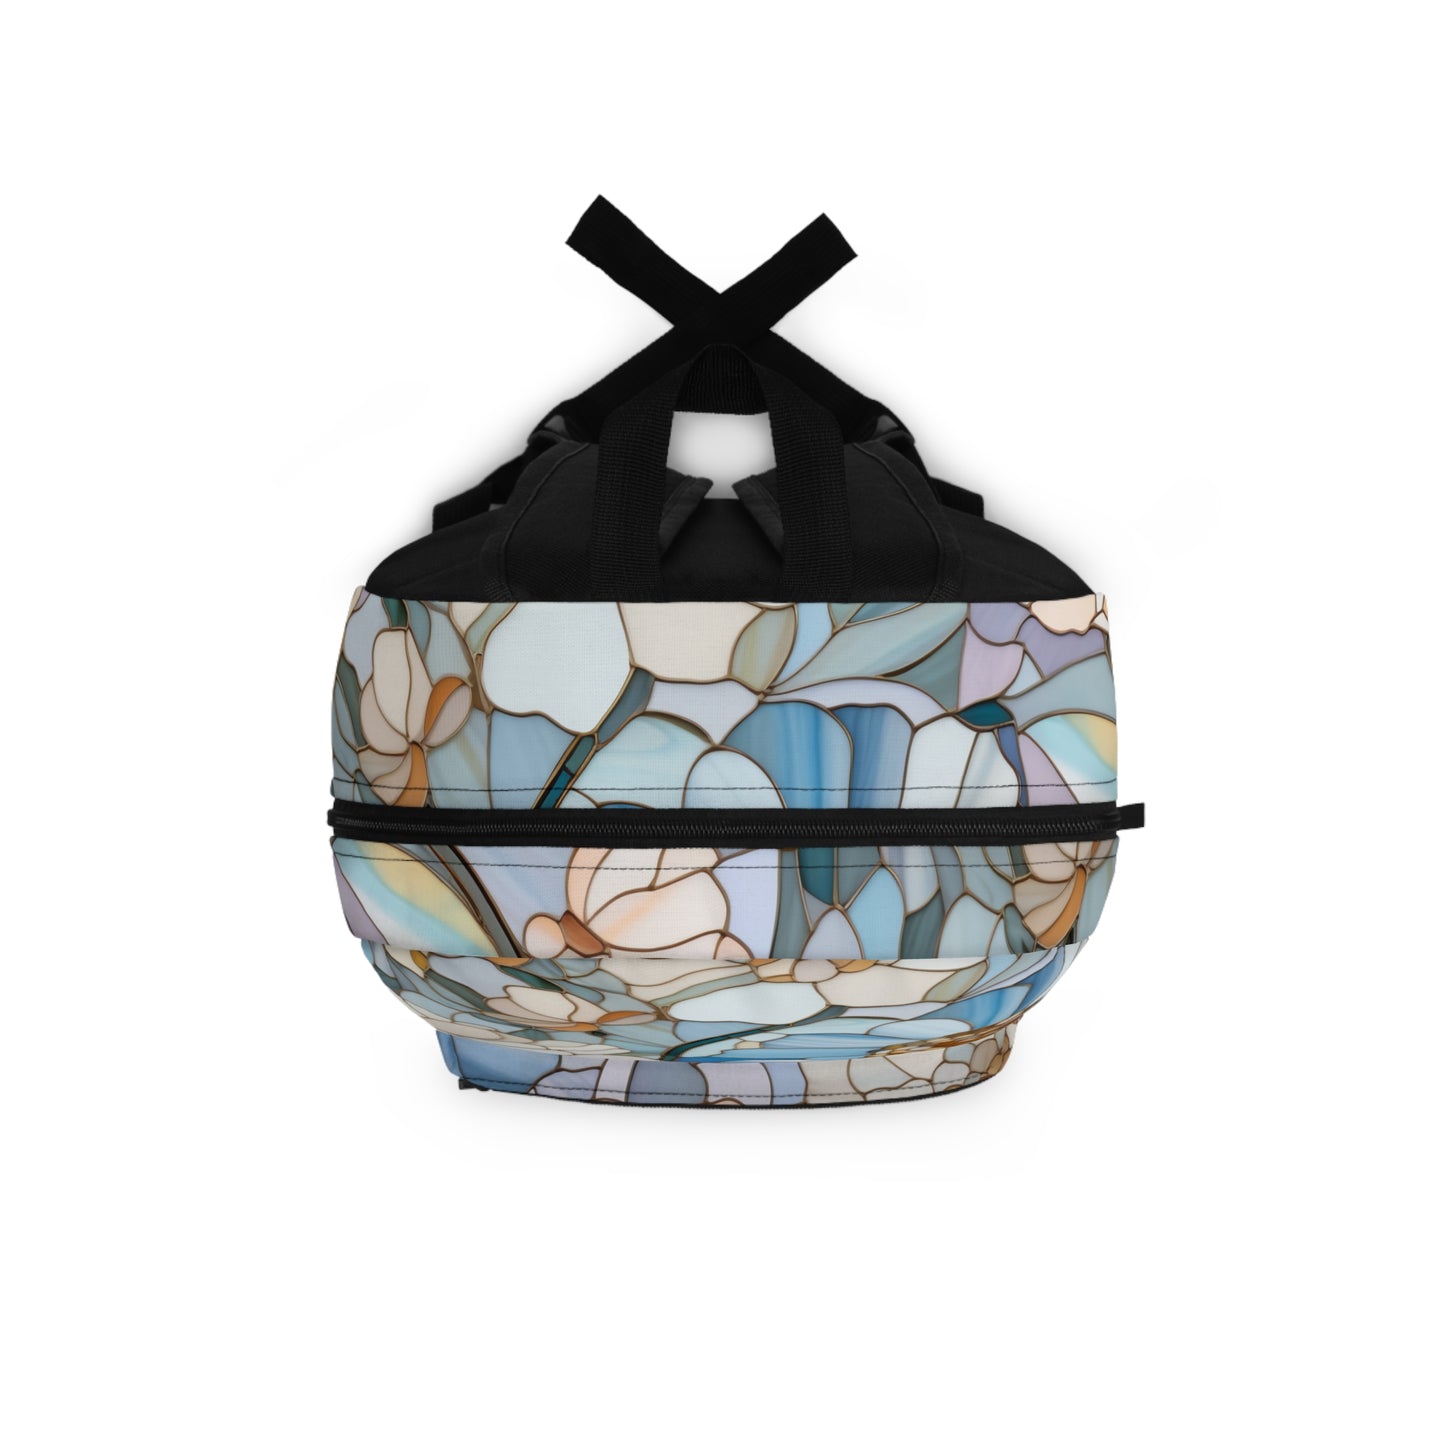 Stained Glass Flowers Backpack